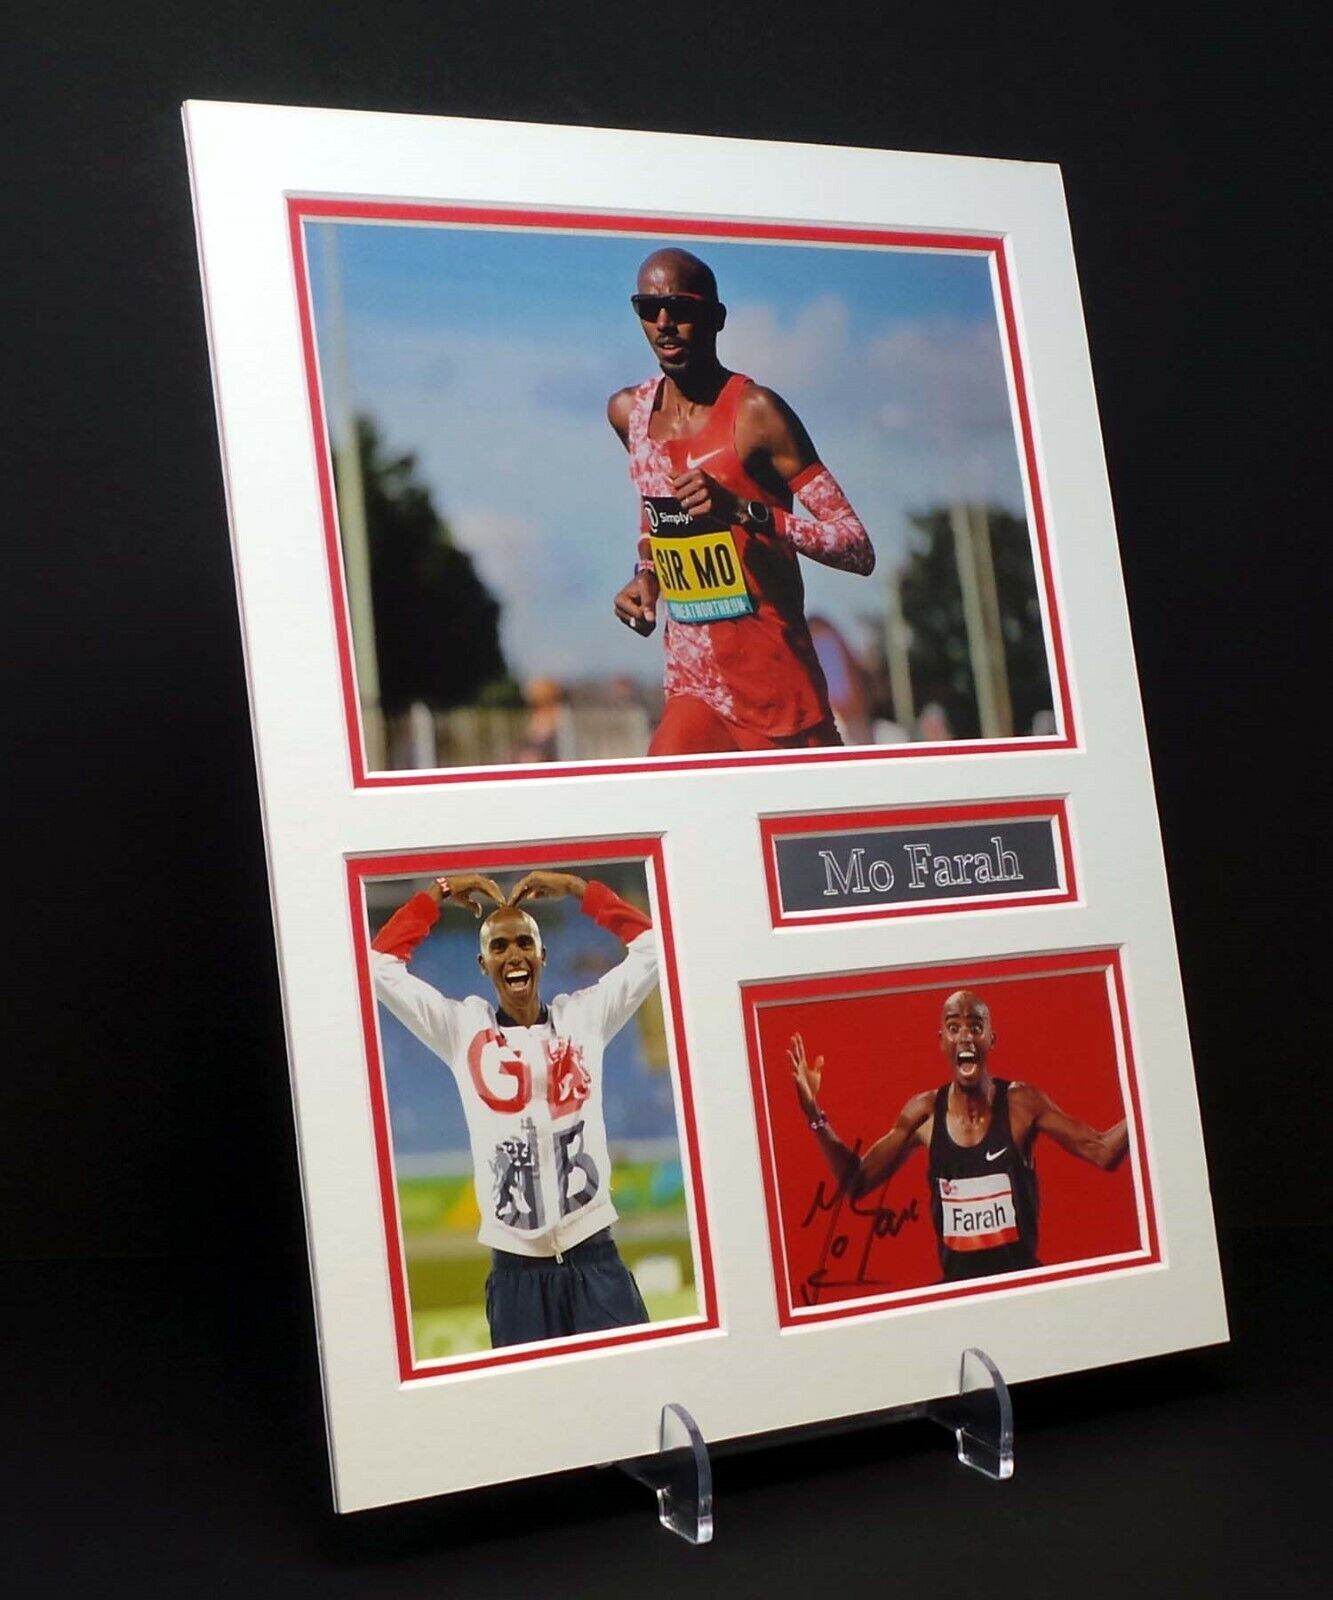 Mo FARAH Signed Mounted Photo Poster painting Display AFTAL Olympic Gold Medal Winning Runner